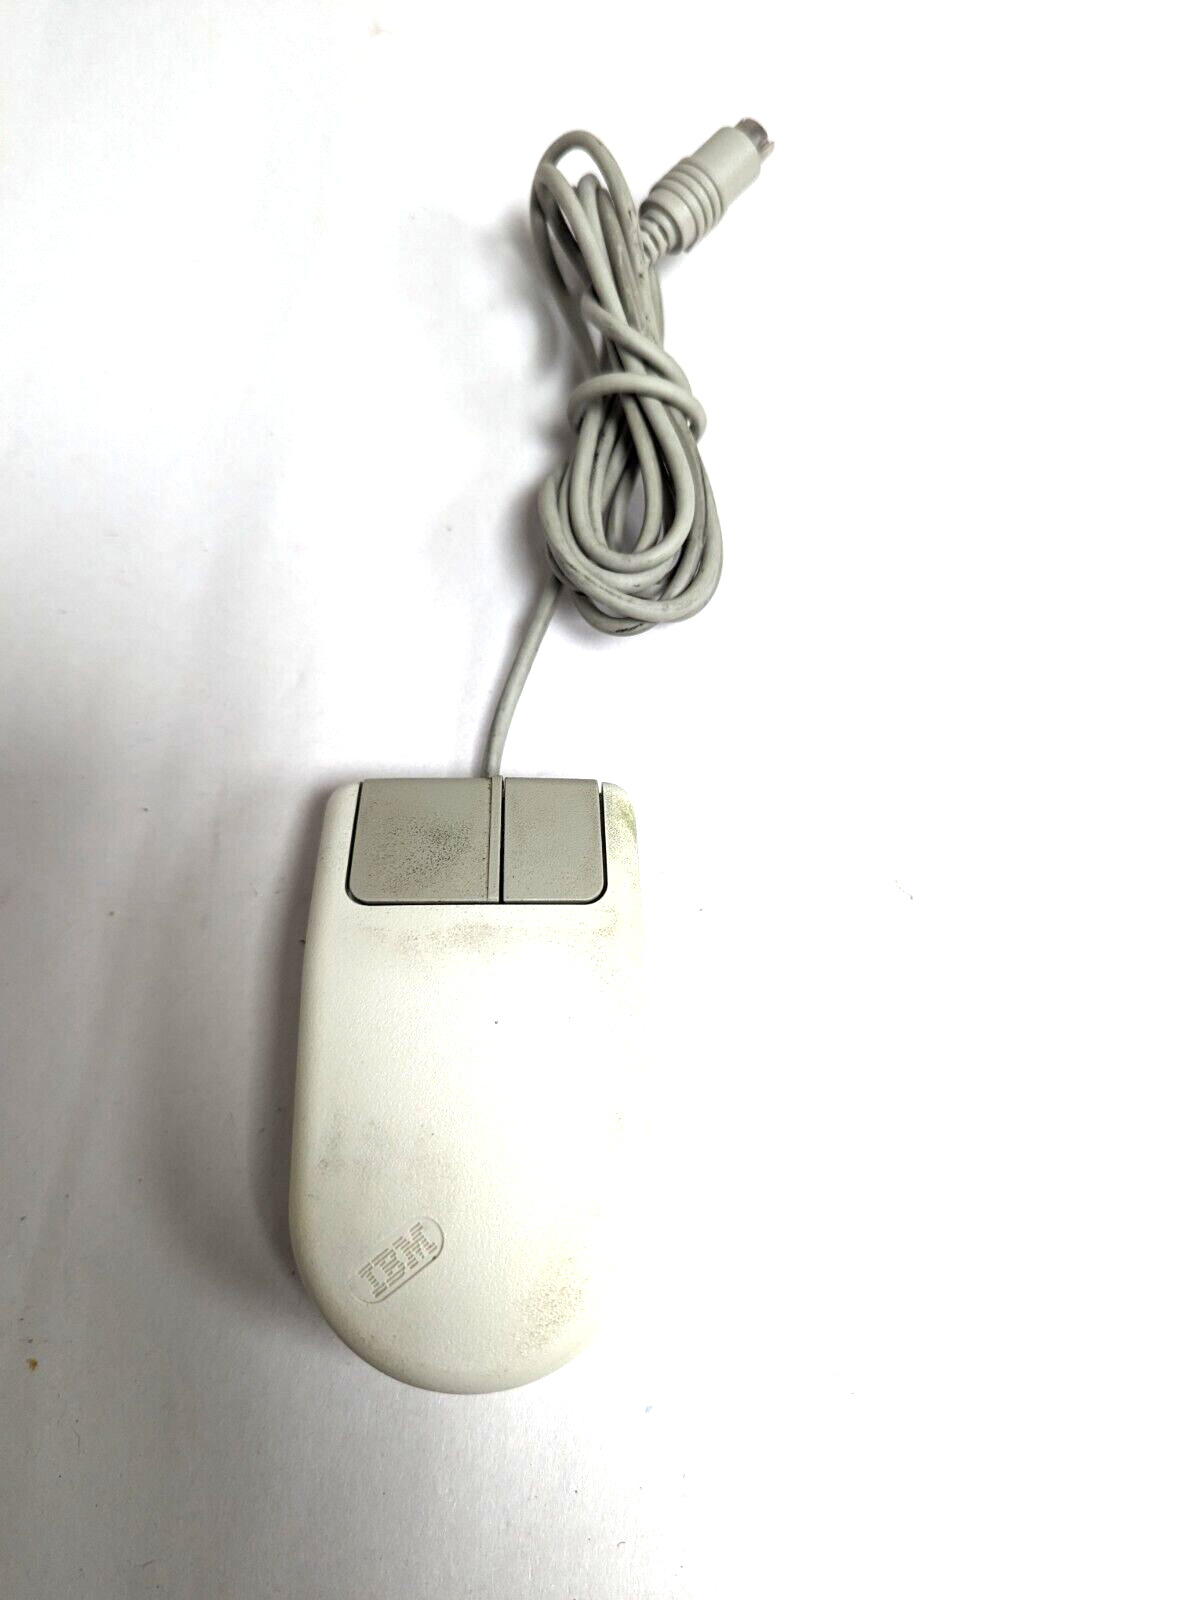 Vintage IBM 2-Button Mouse 33G3835 different pin